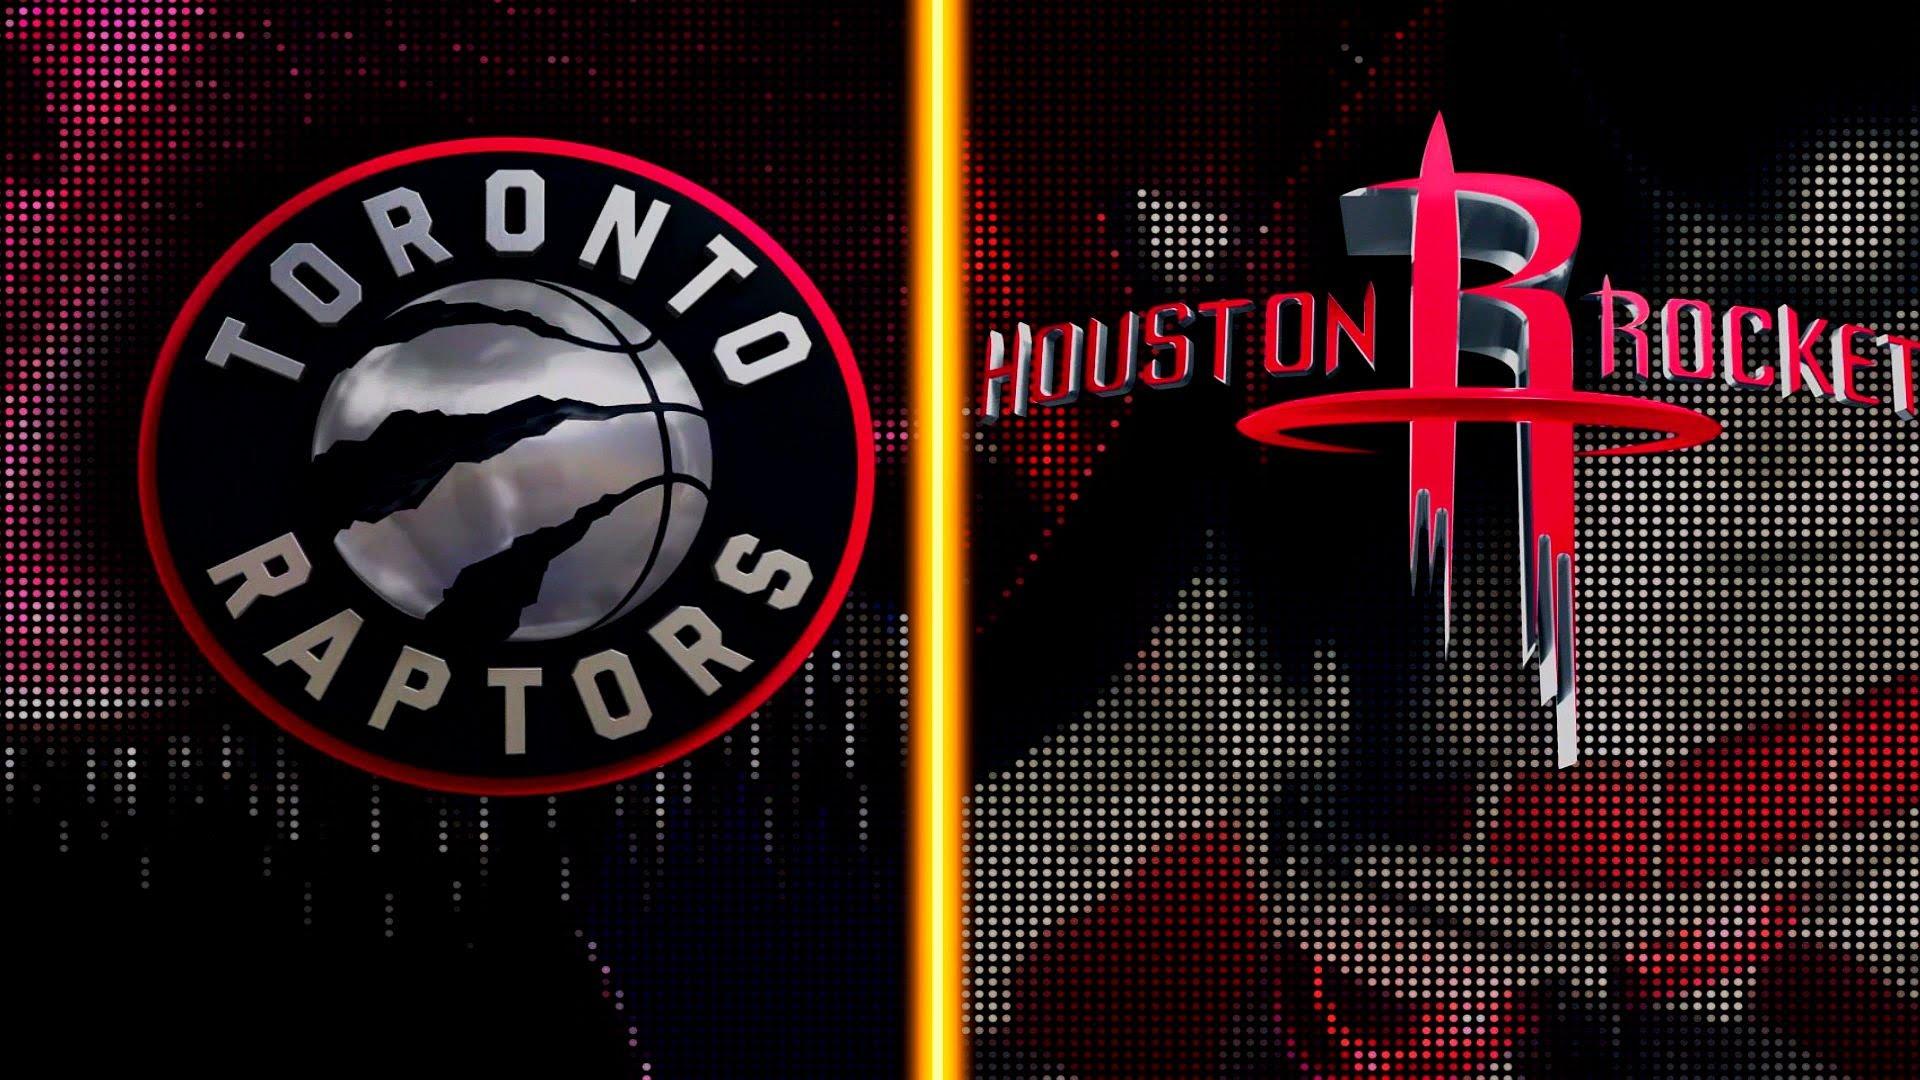 Will The Rockets And The Raptors End The NBA Finals Monotony?